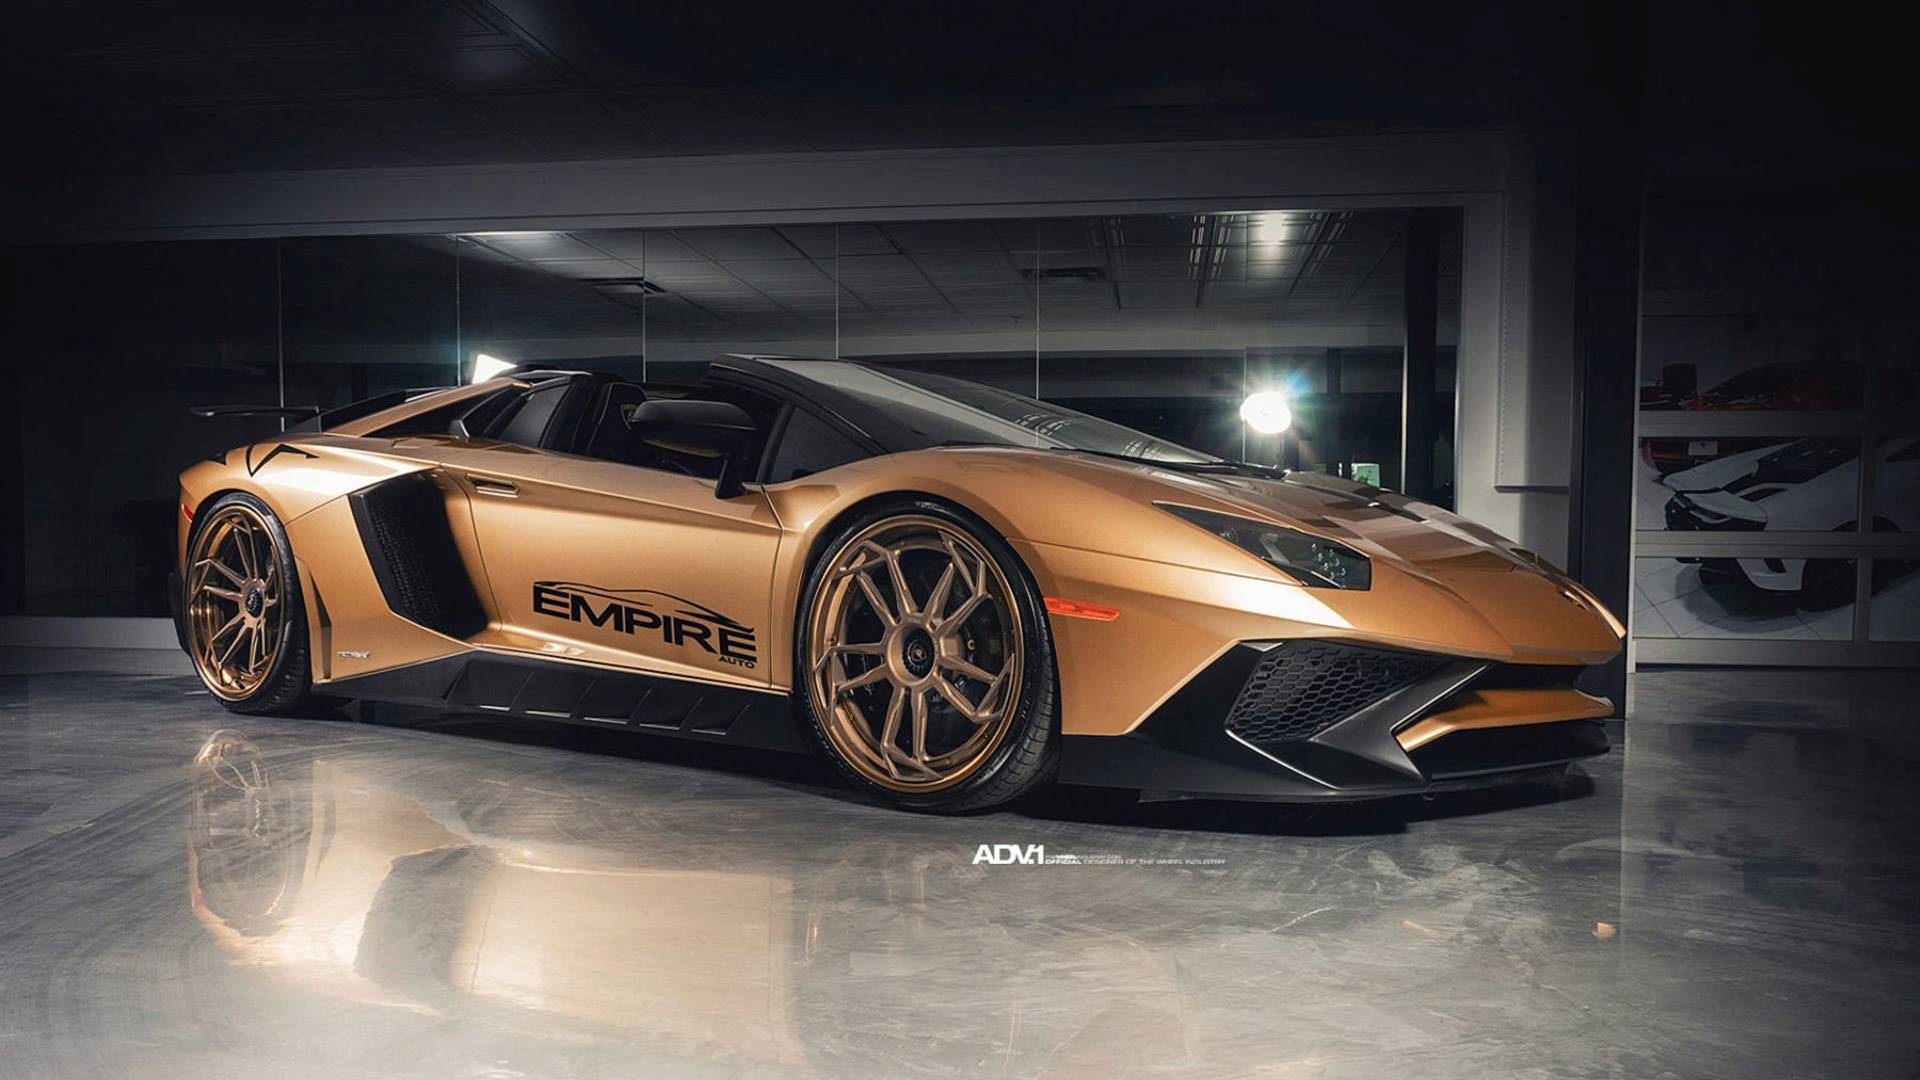 Gold Lambo Logo - There's Flashy, And Then There's This Matte Gold Lambo Aventador